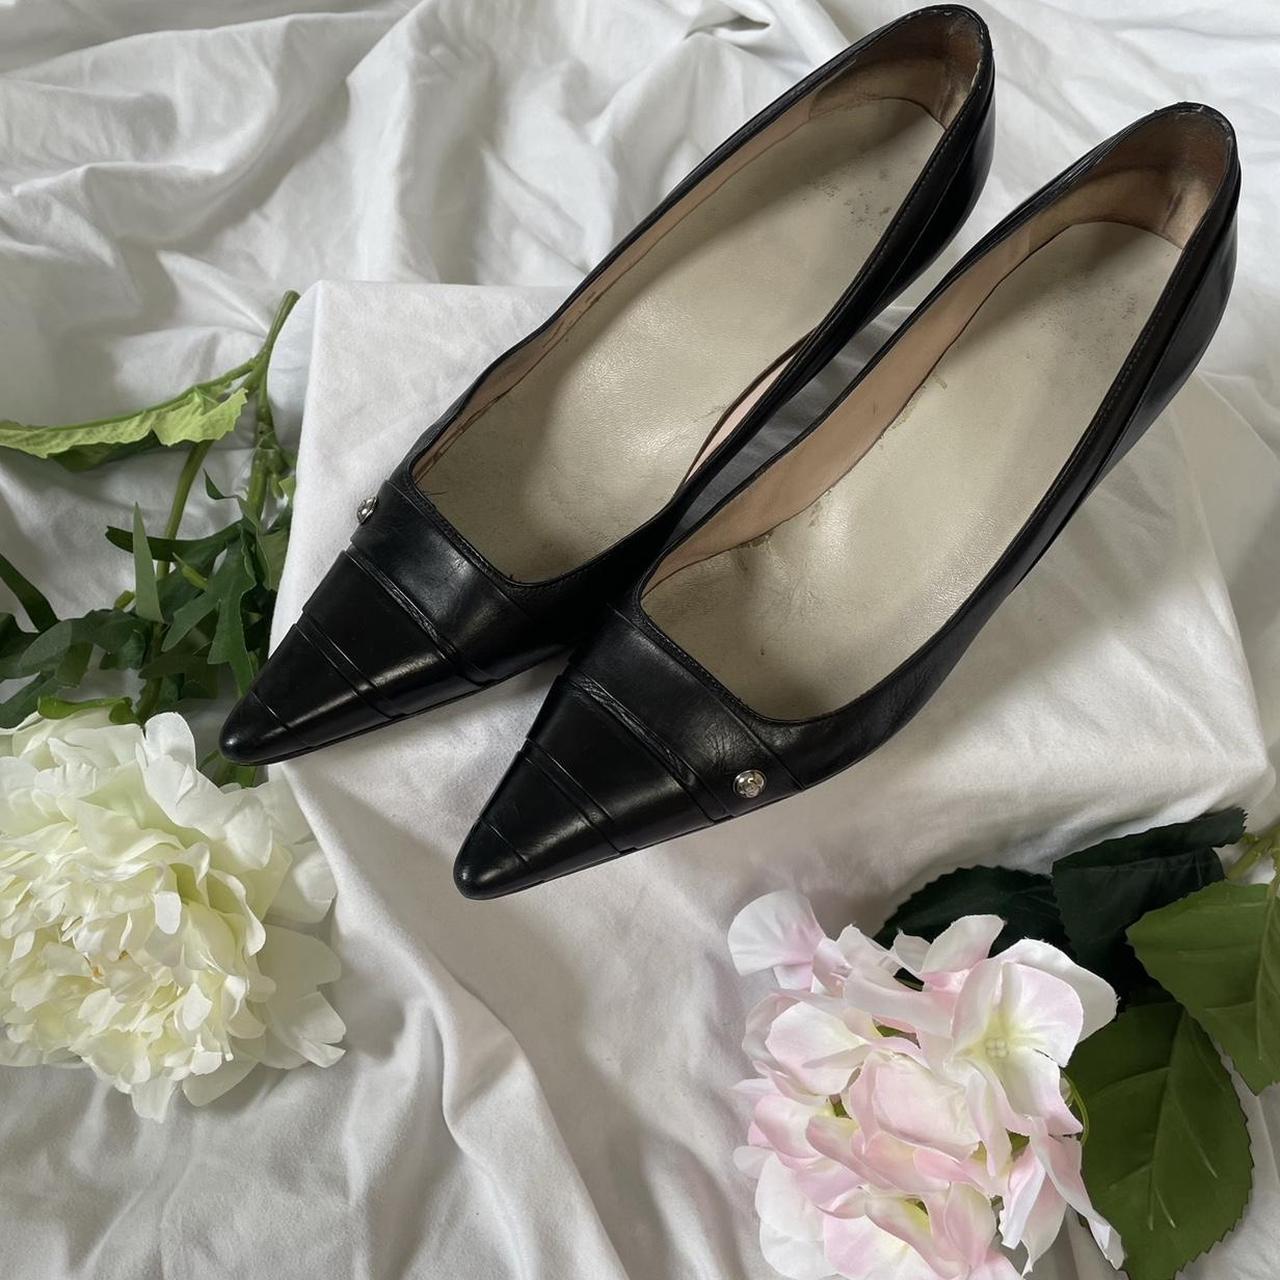 Authentic black Chanel heeled loafer shoes Chanel - Depop